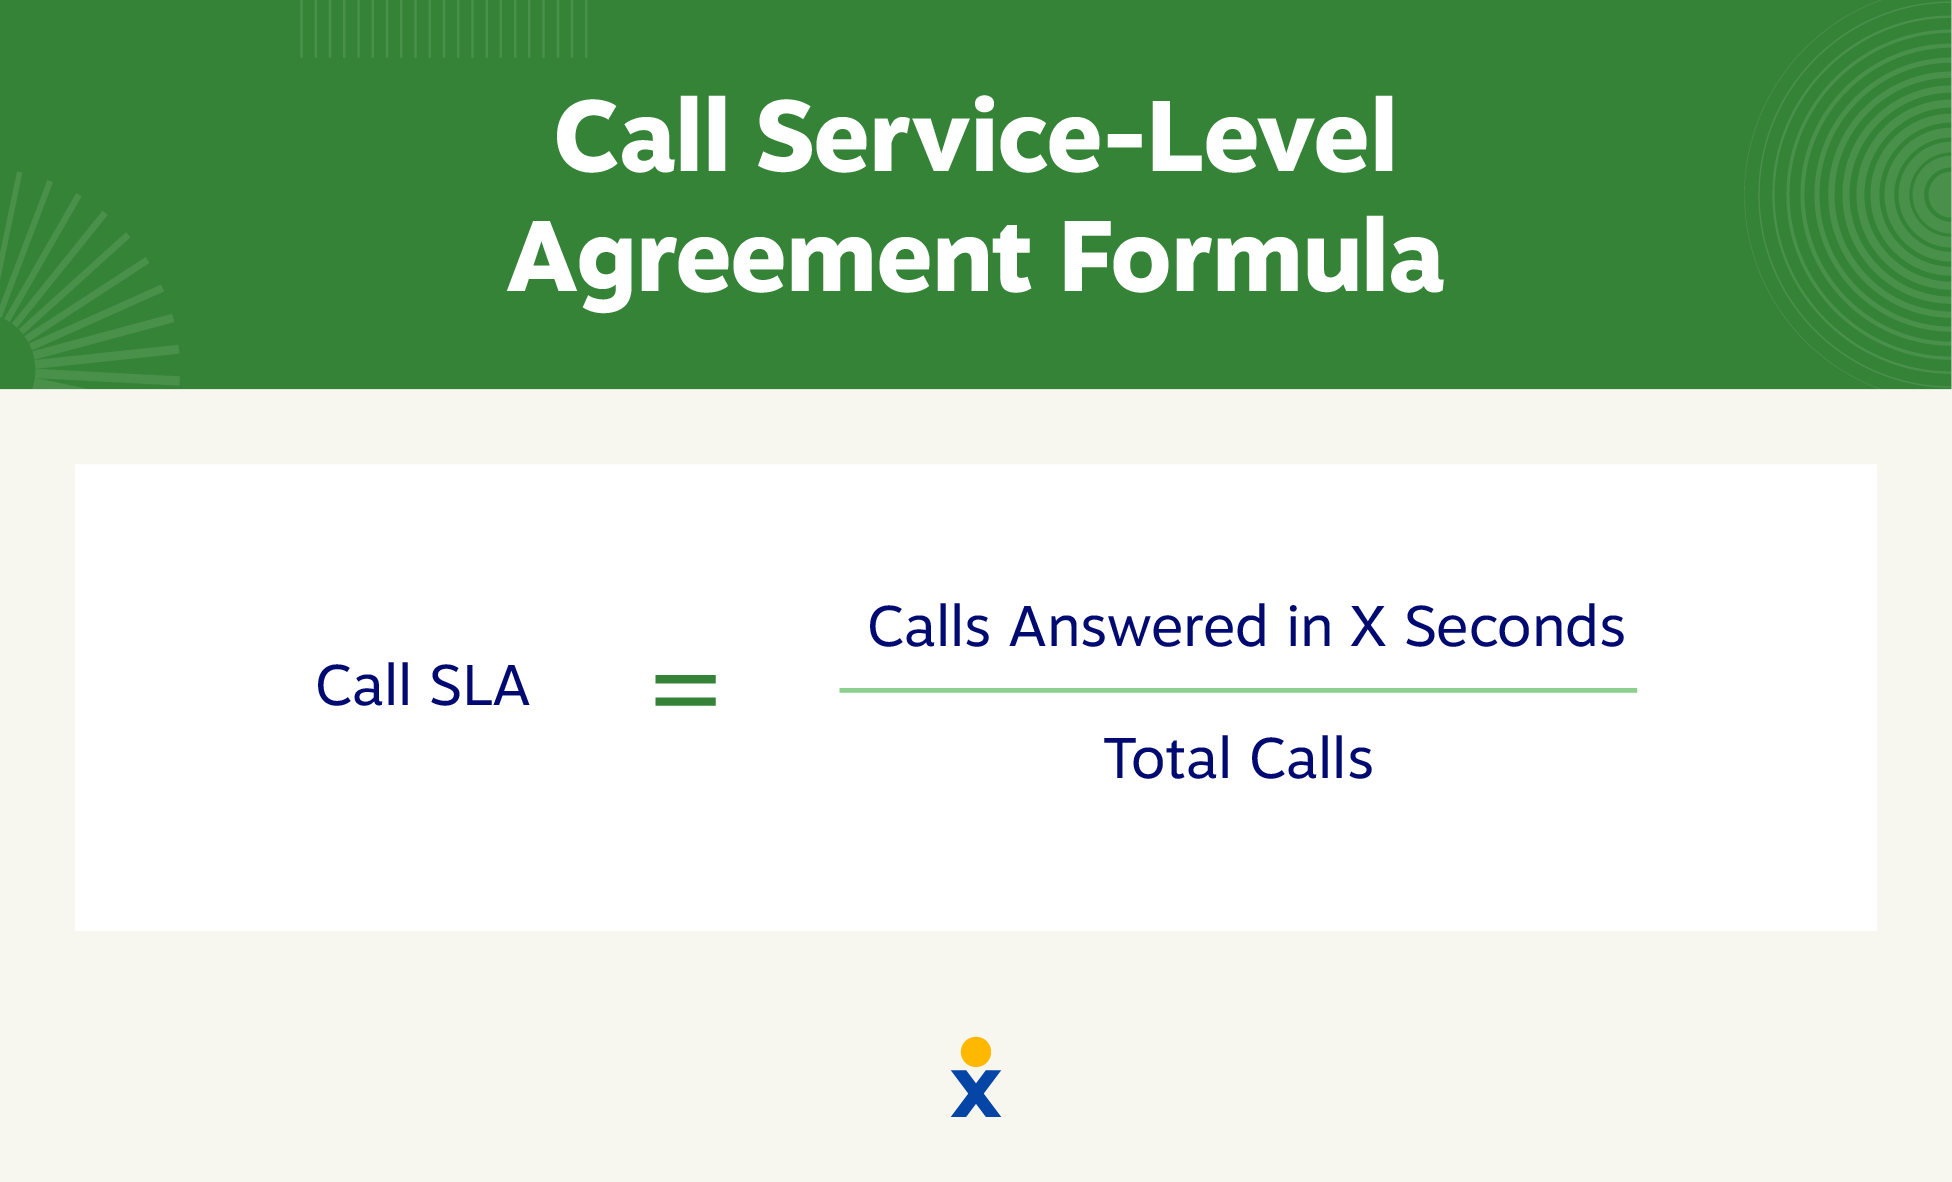 Call Service-Level Agreement